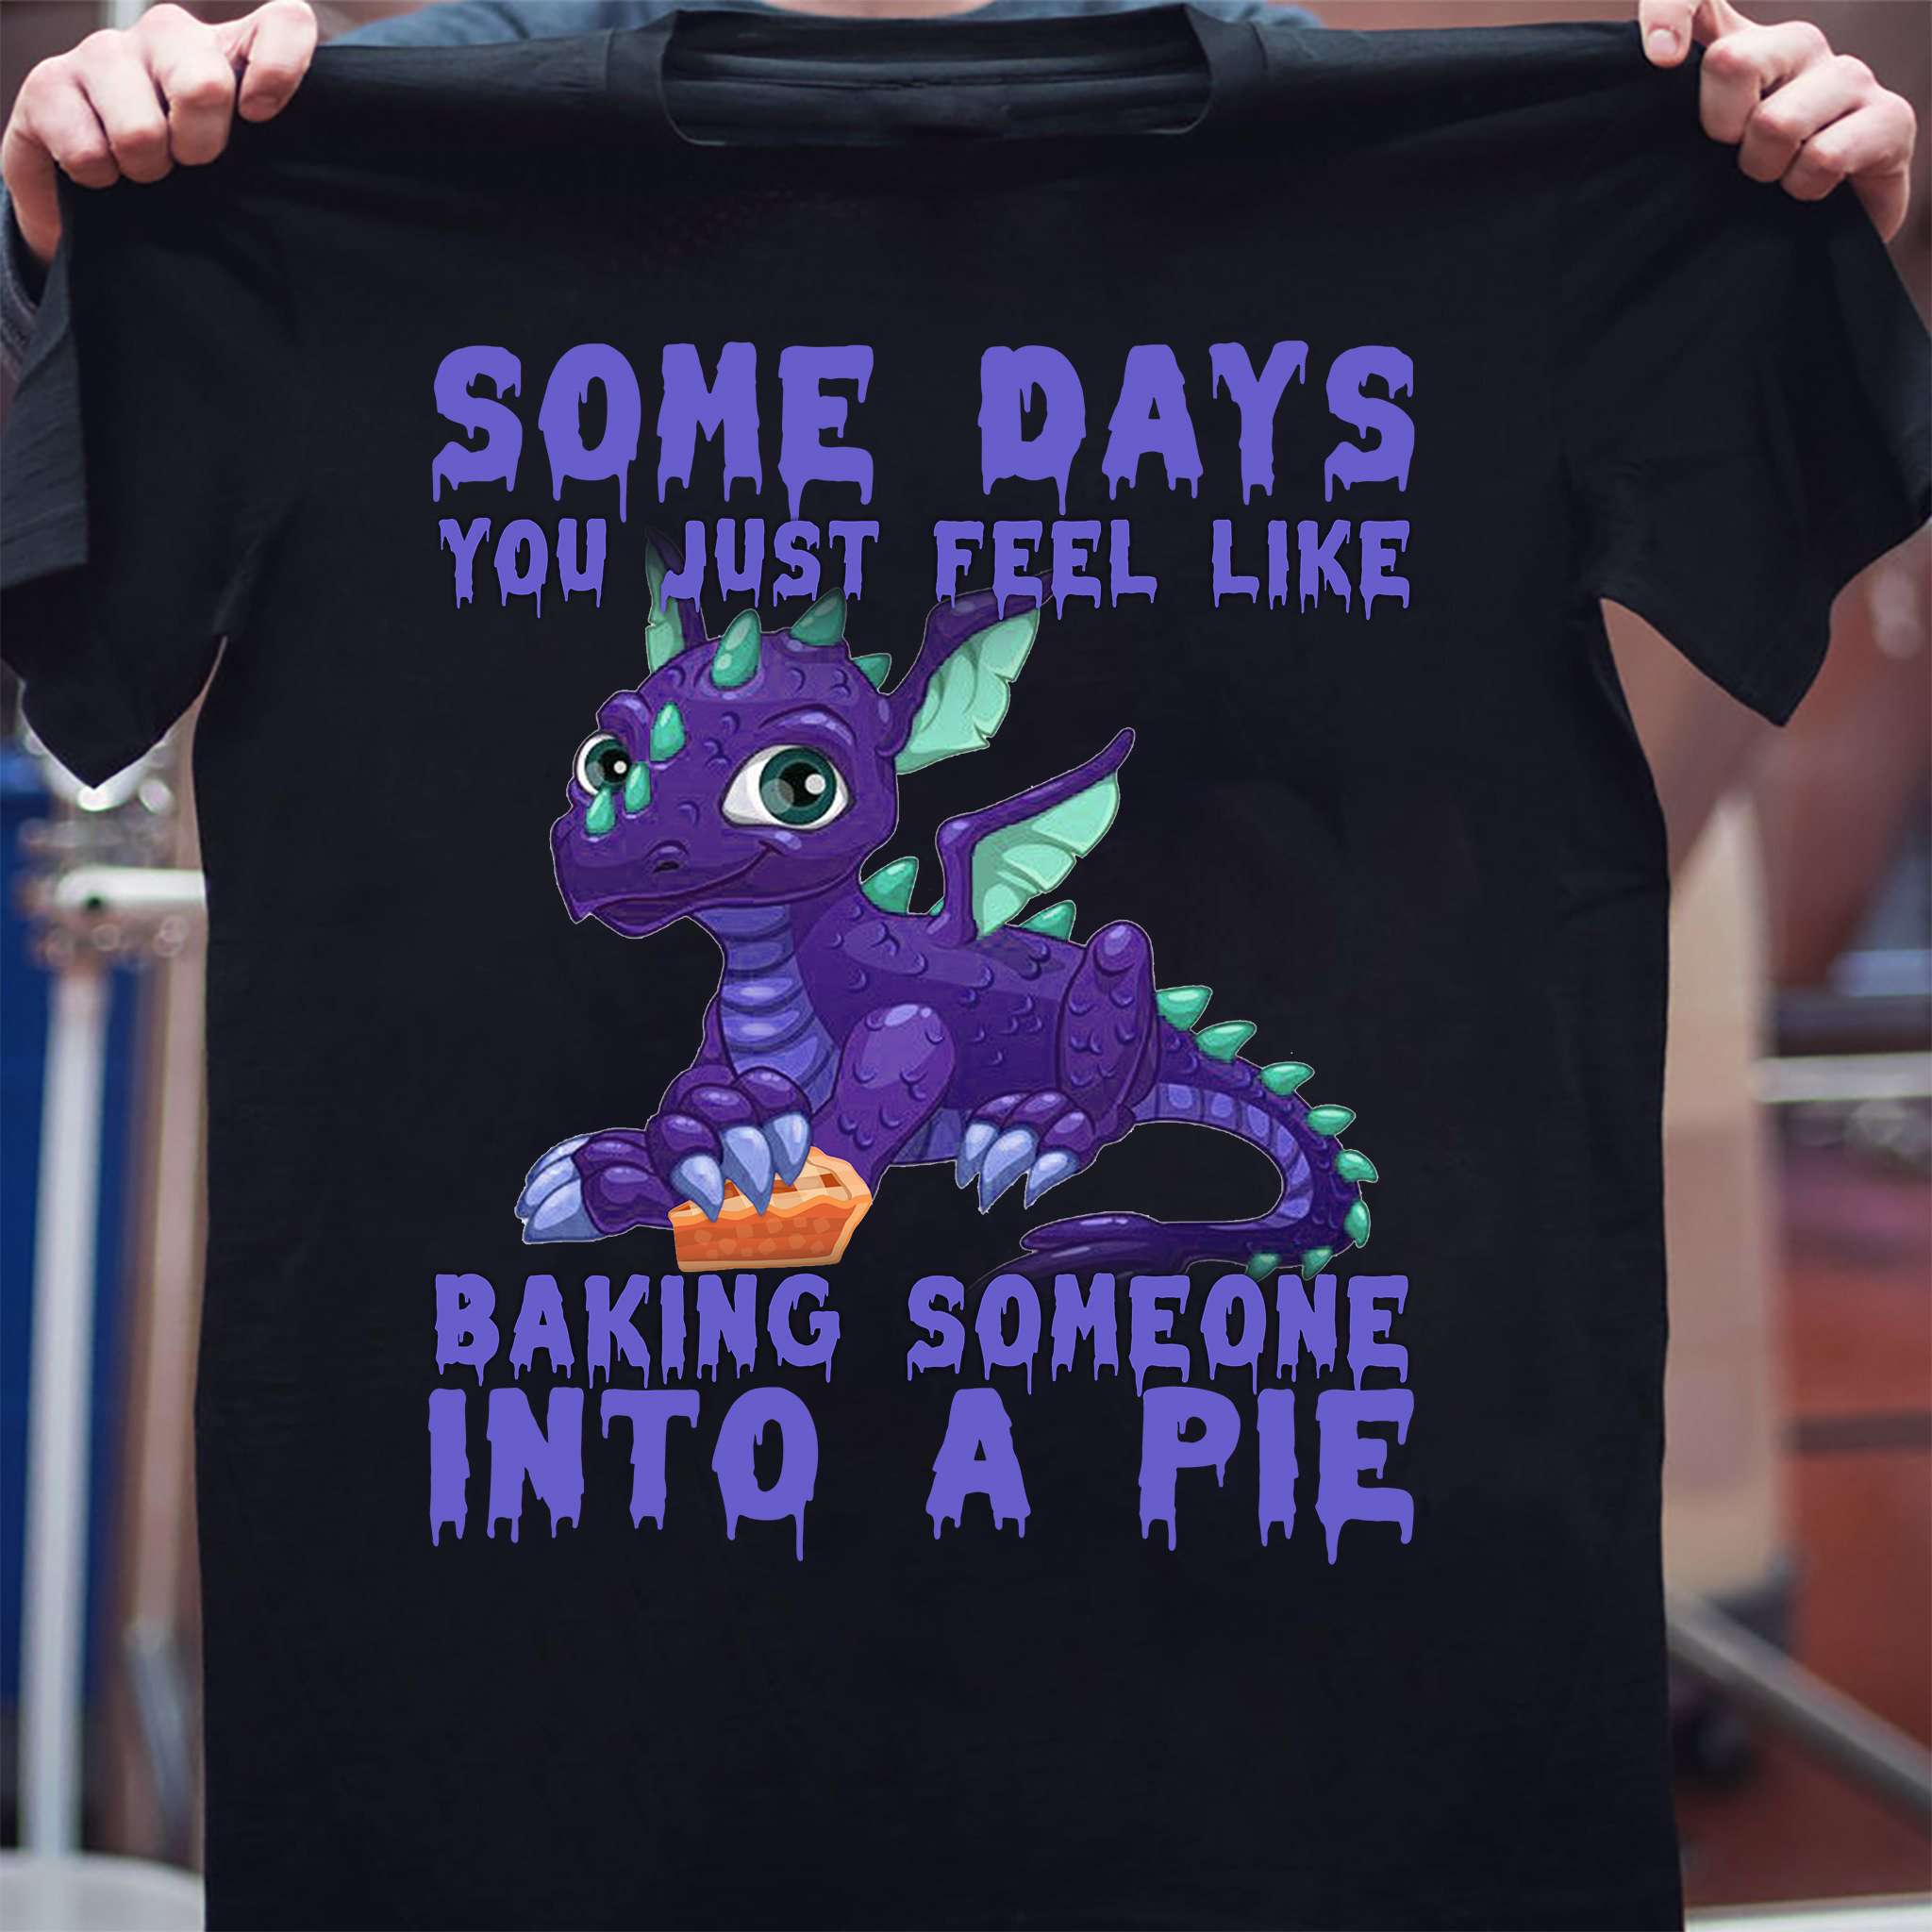 Some days you just feel like baking someone into a pie - Dragon and pie This T-Shirt, Hoodie, Sweatshirt, Ladies T-Shirt, Youth T-shirt is for lovers like Dragon and pie, baking someone into pie, bad day . Shirt are much suitable for those who Love Hobbies, Holidays, Pets, Movies, Out Door, Sport.